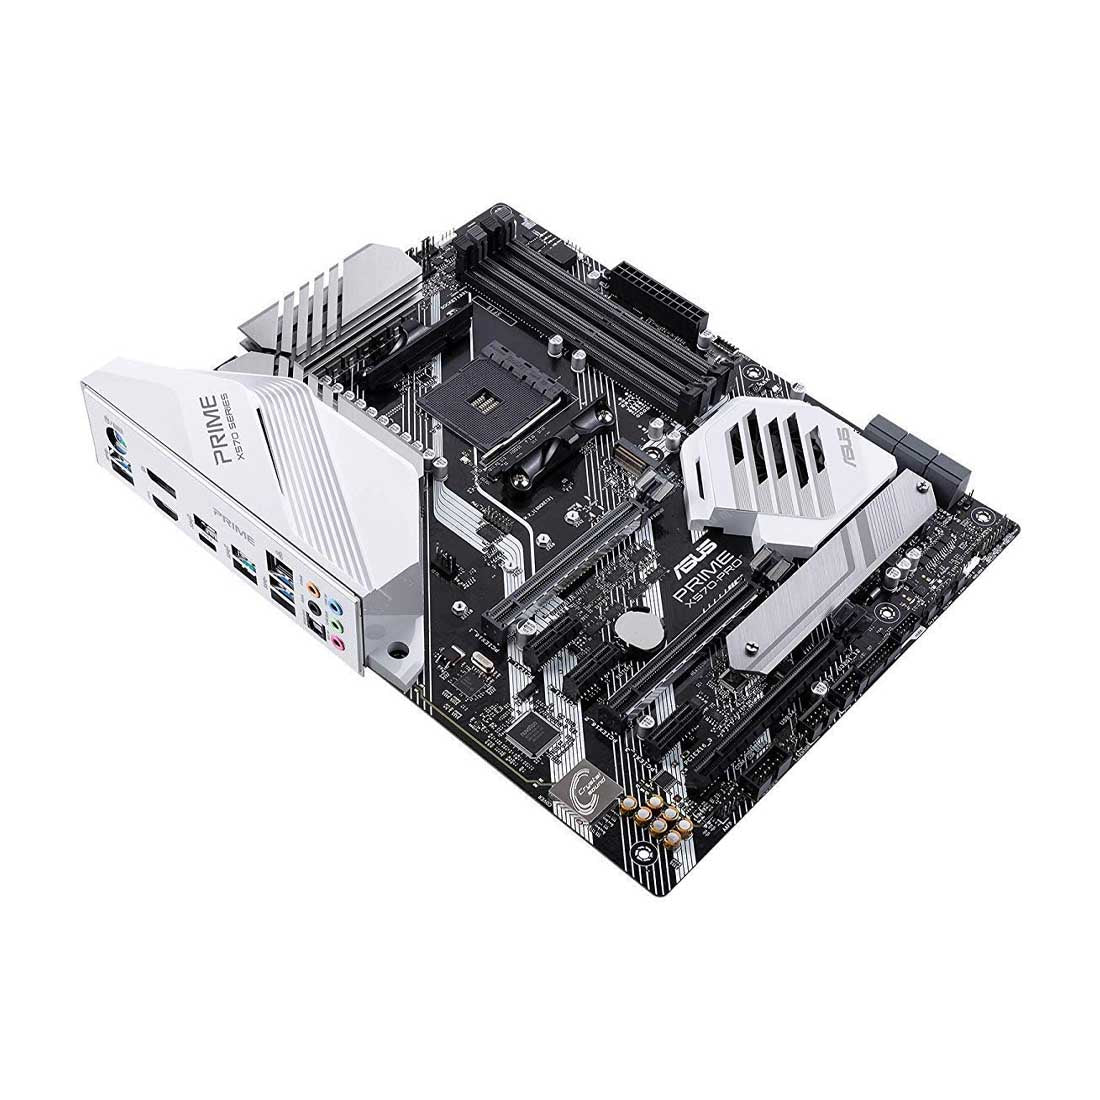 ASUS Prime X570-PRO CSM AMD AM4 ATX Motherboard with PCIe 4.0 Dual M.2 and Aura Sync